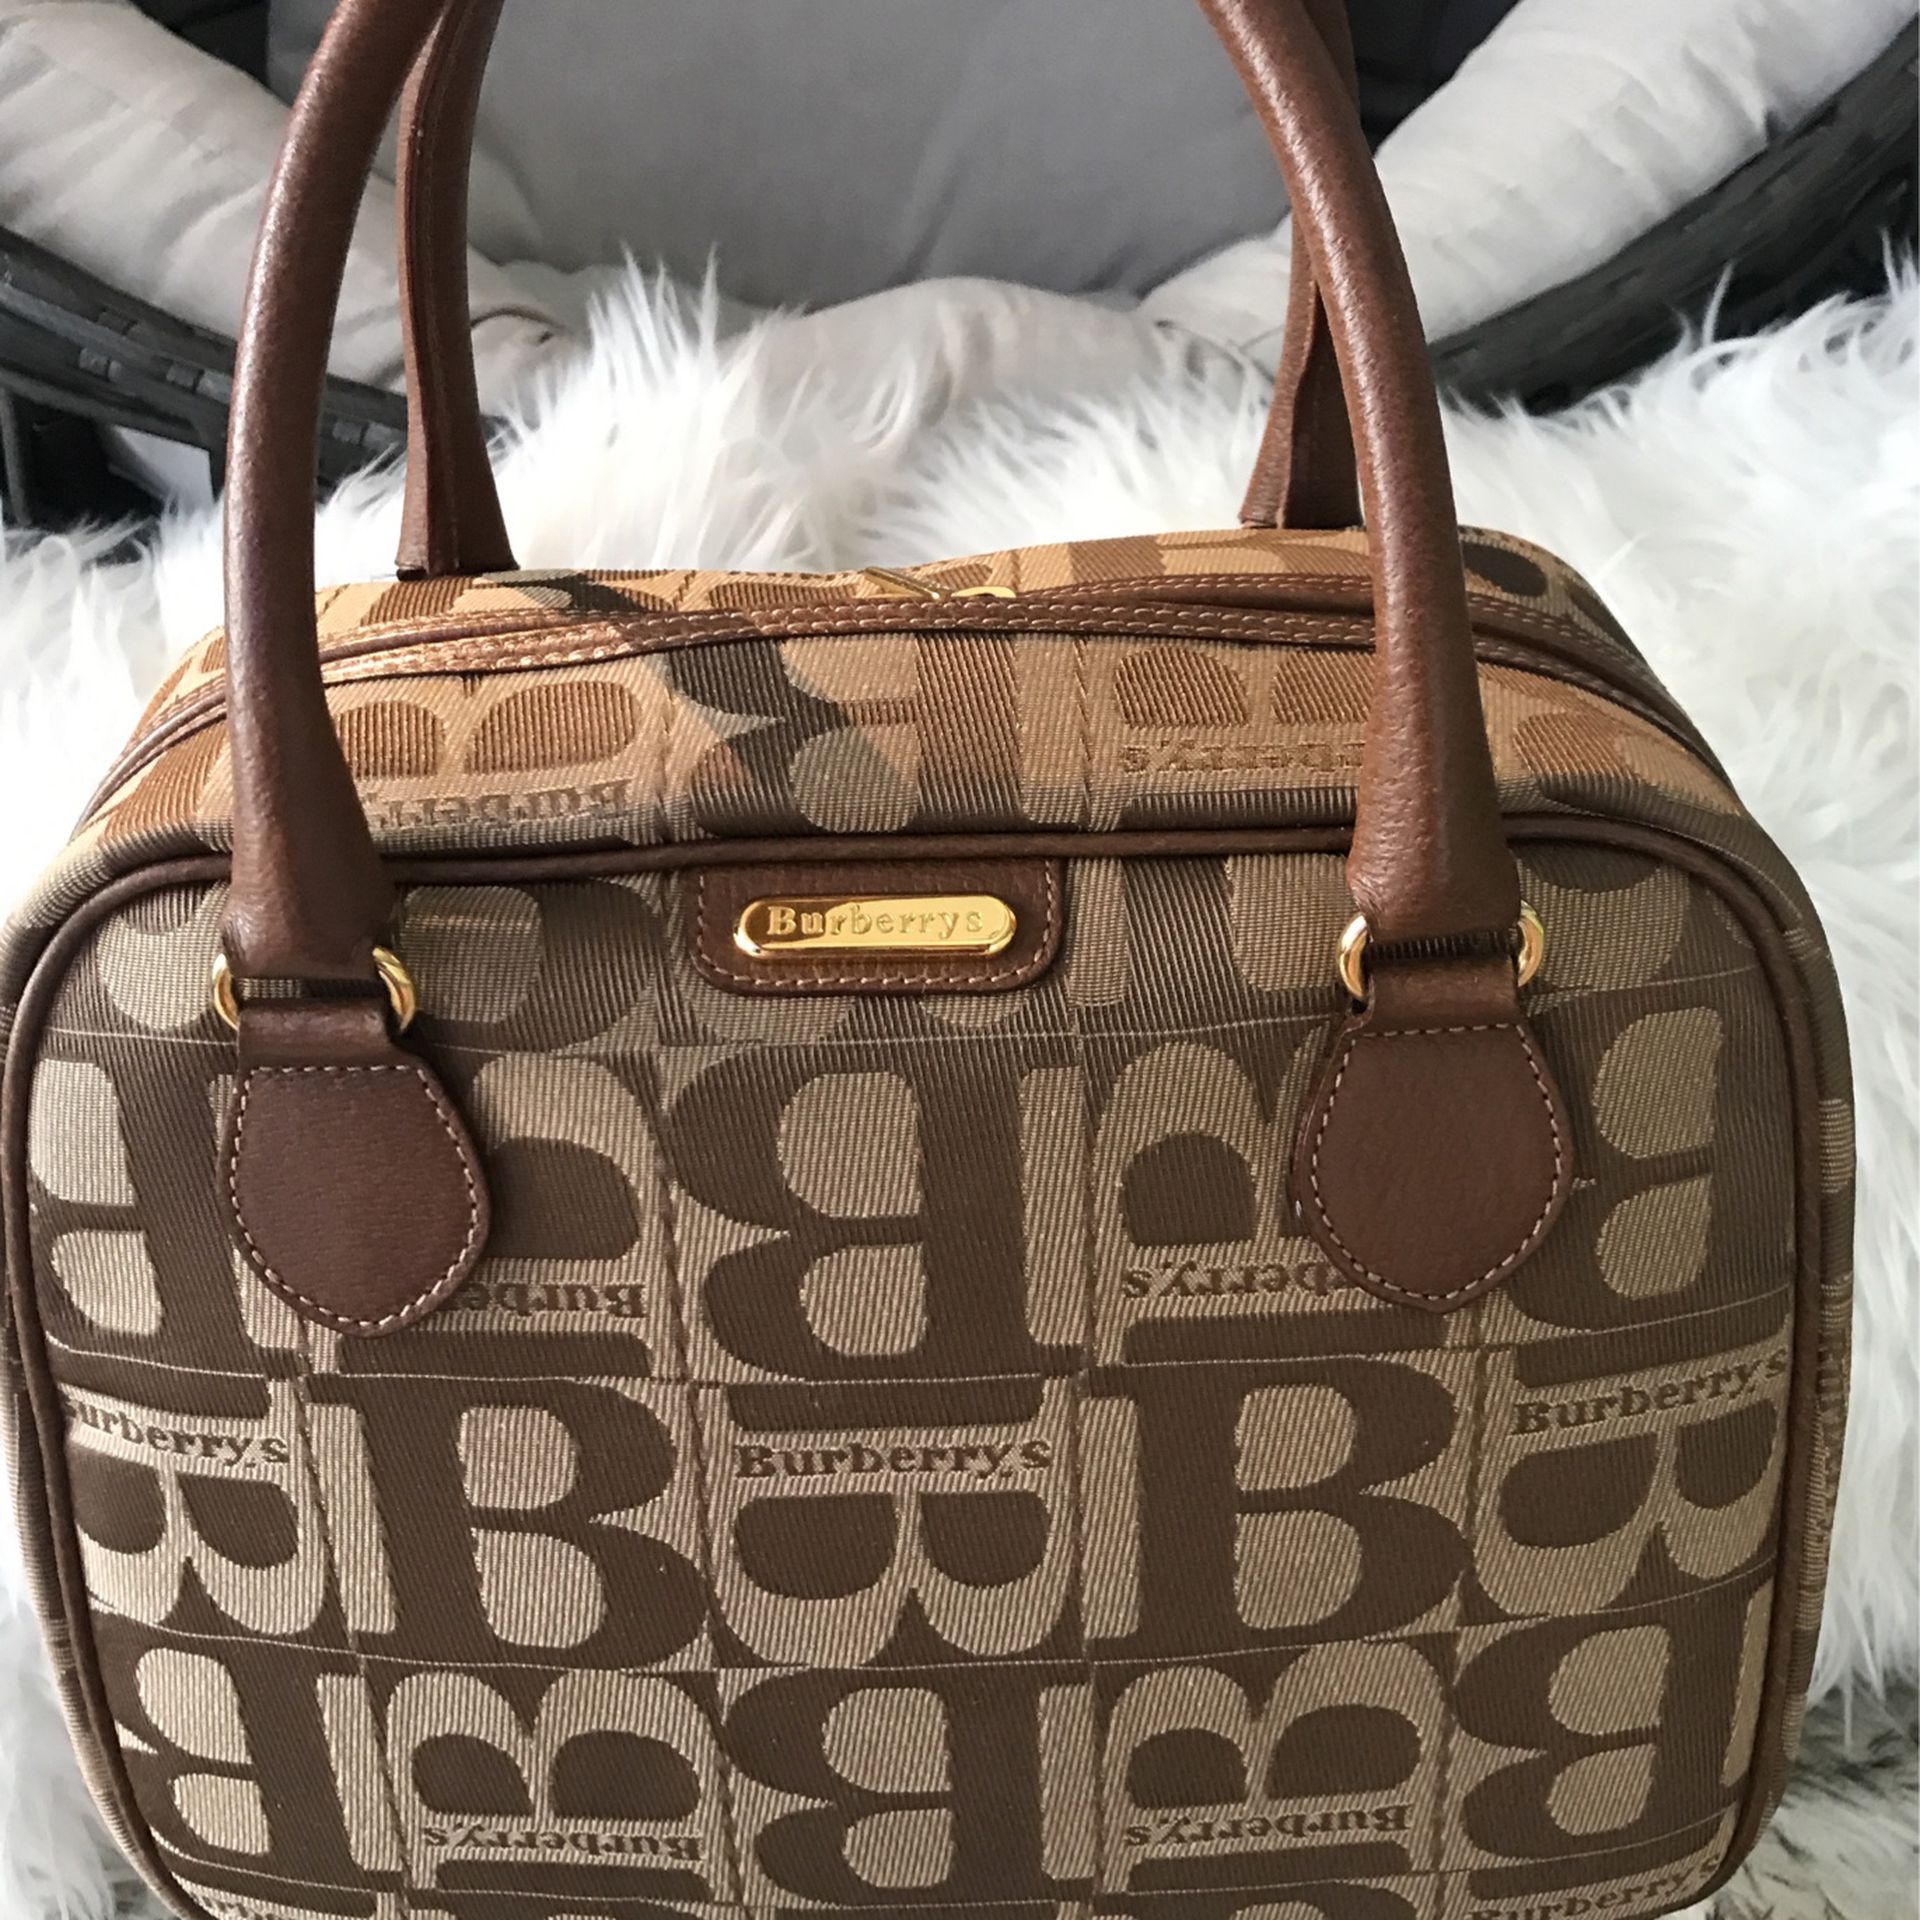 Burberry Bridle Peyton Crossbody Bag House Check Canvas Excellent Condition  for Sale in Laguna Hills, CA - OfferUp